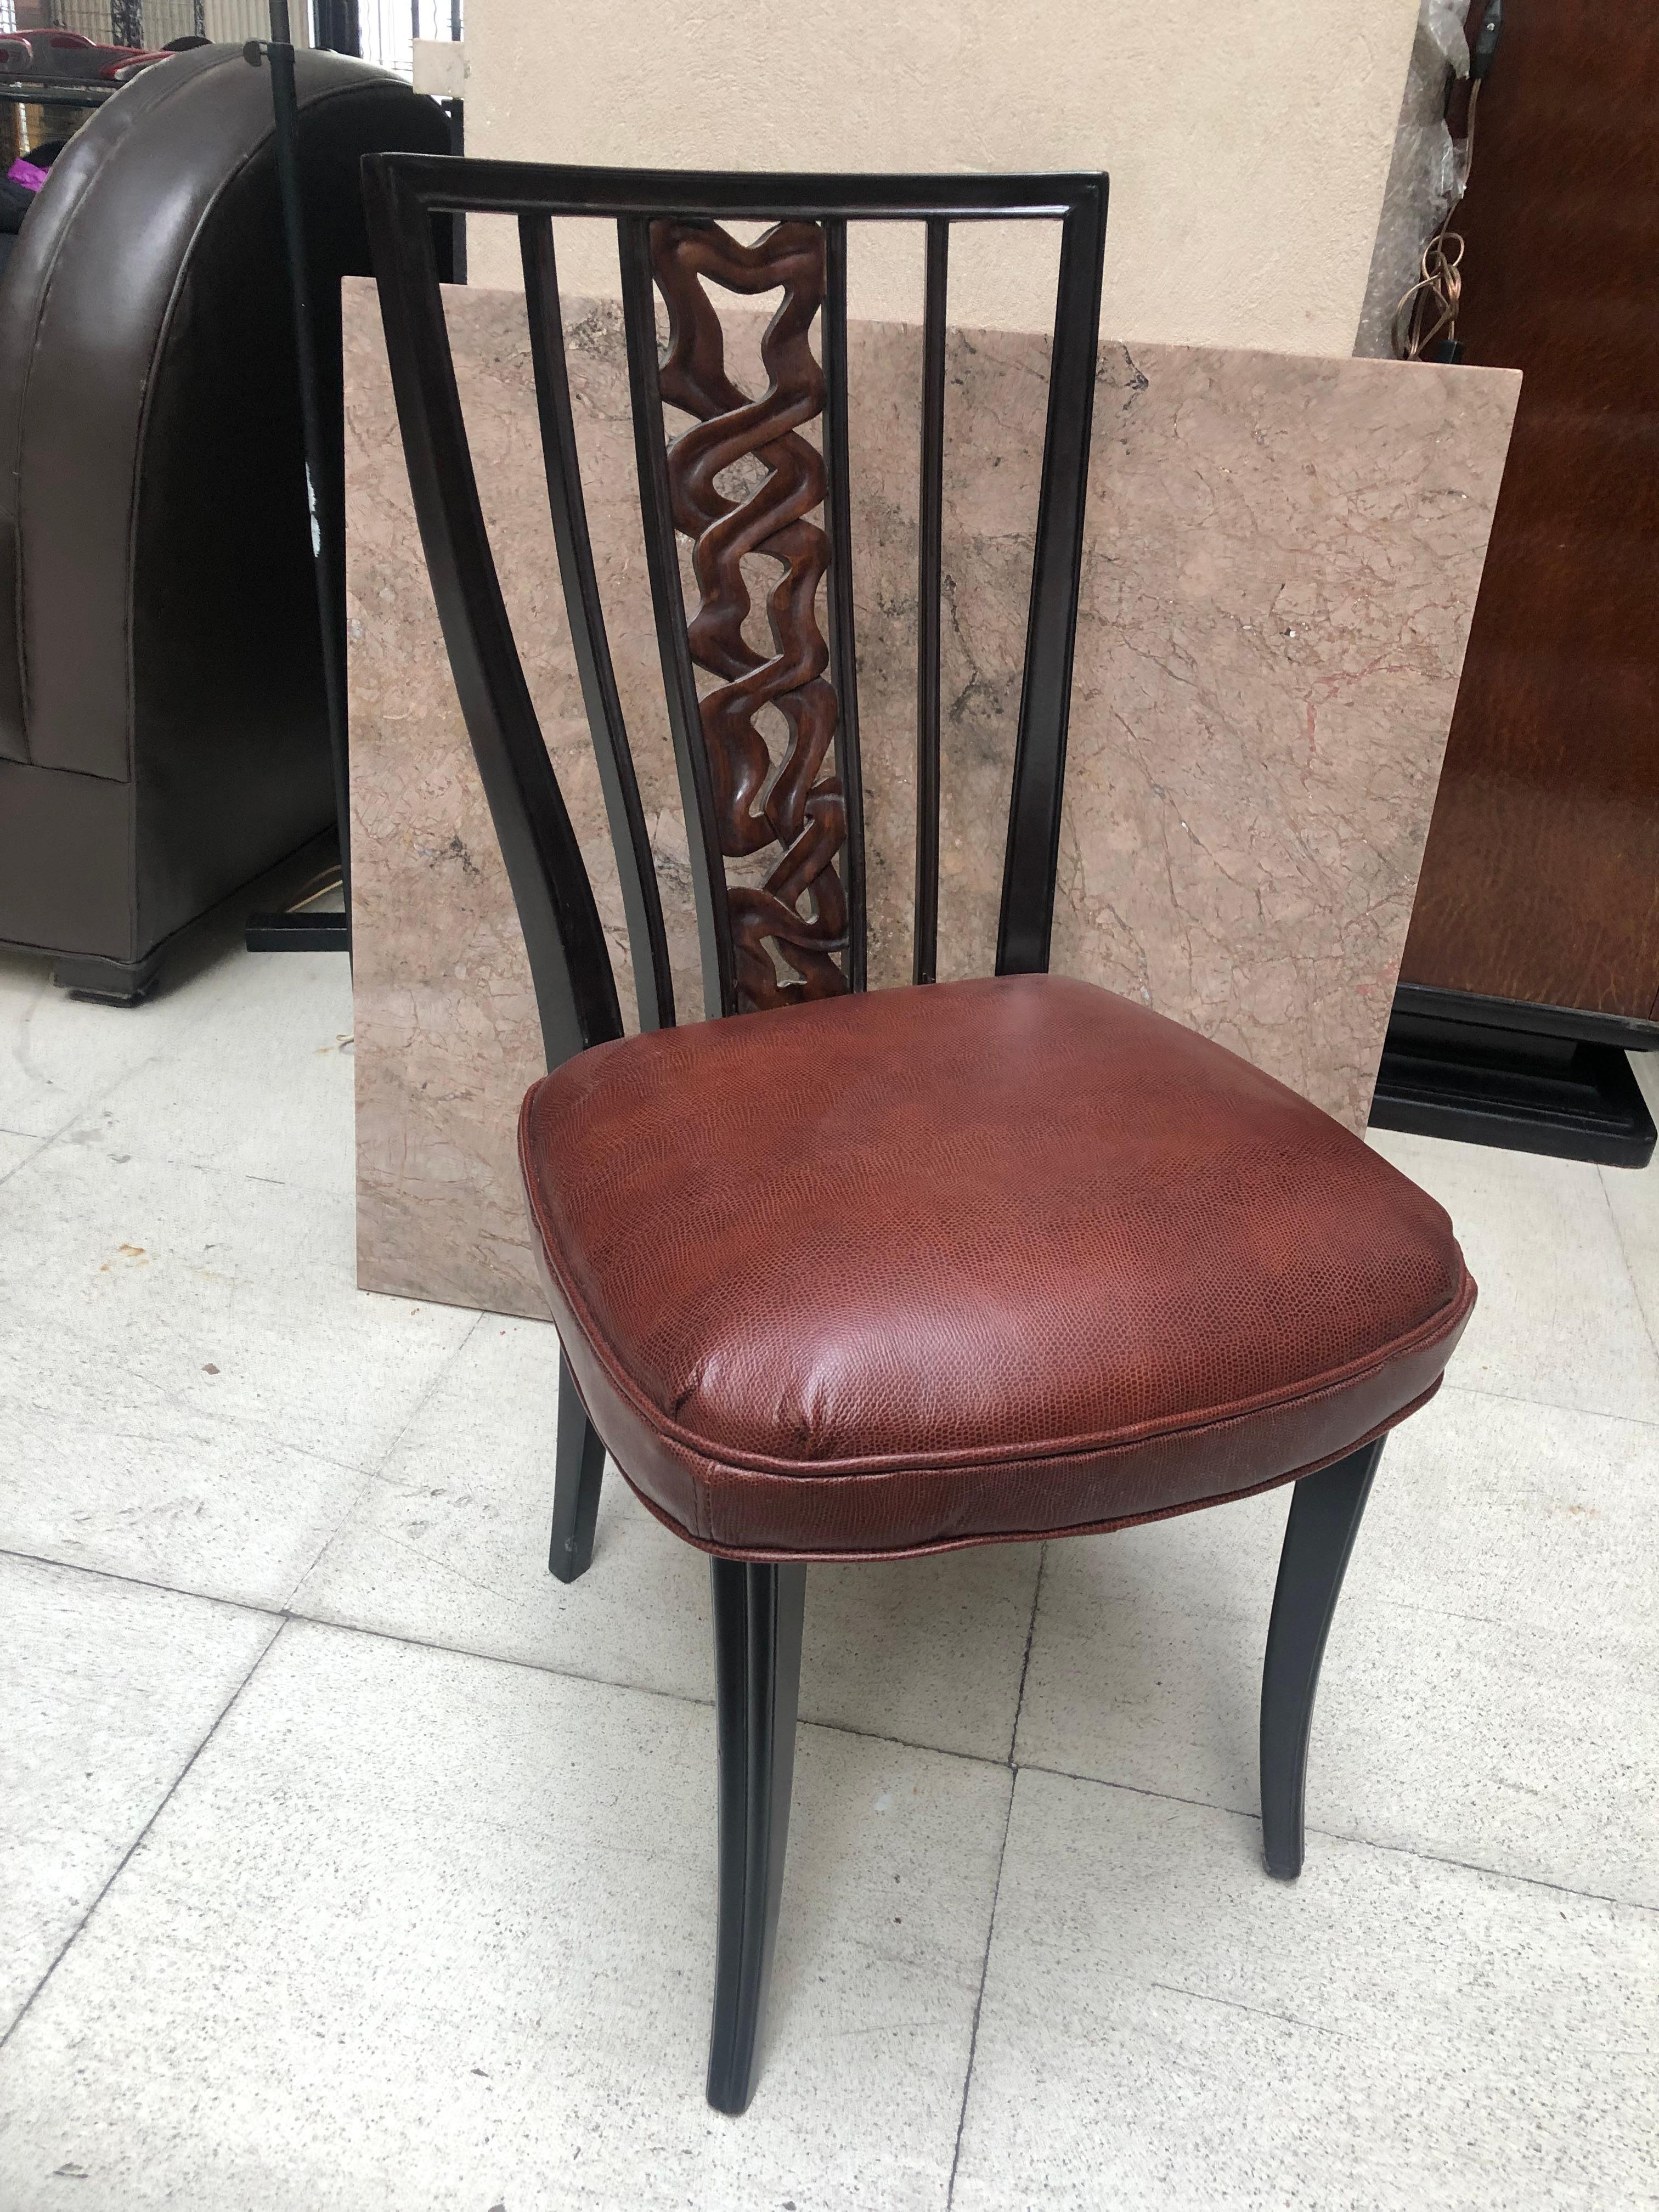 2 Chairs

We have specialized in the sale of Art Deco and Art Nouveau and Vintage styles since 1982. If you have any questions we are at your disposal.
Pushing the button that reads 'View All From Seller'. And you can see more objects to the